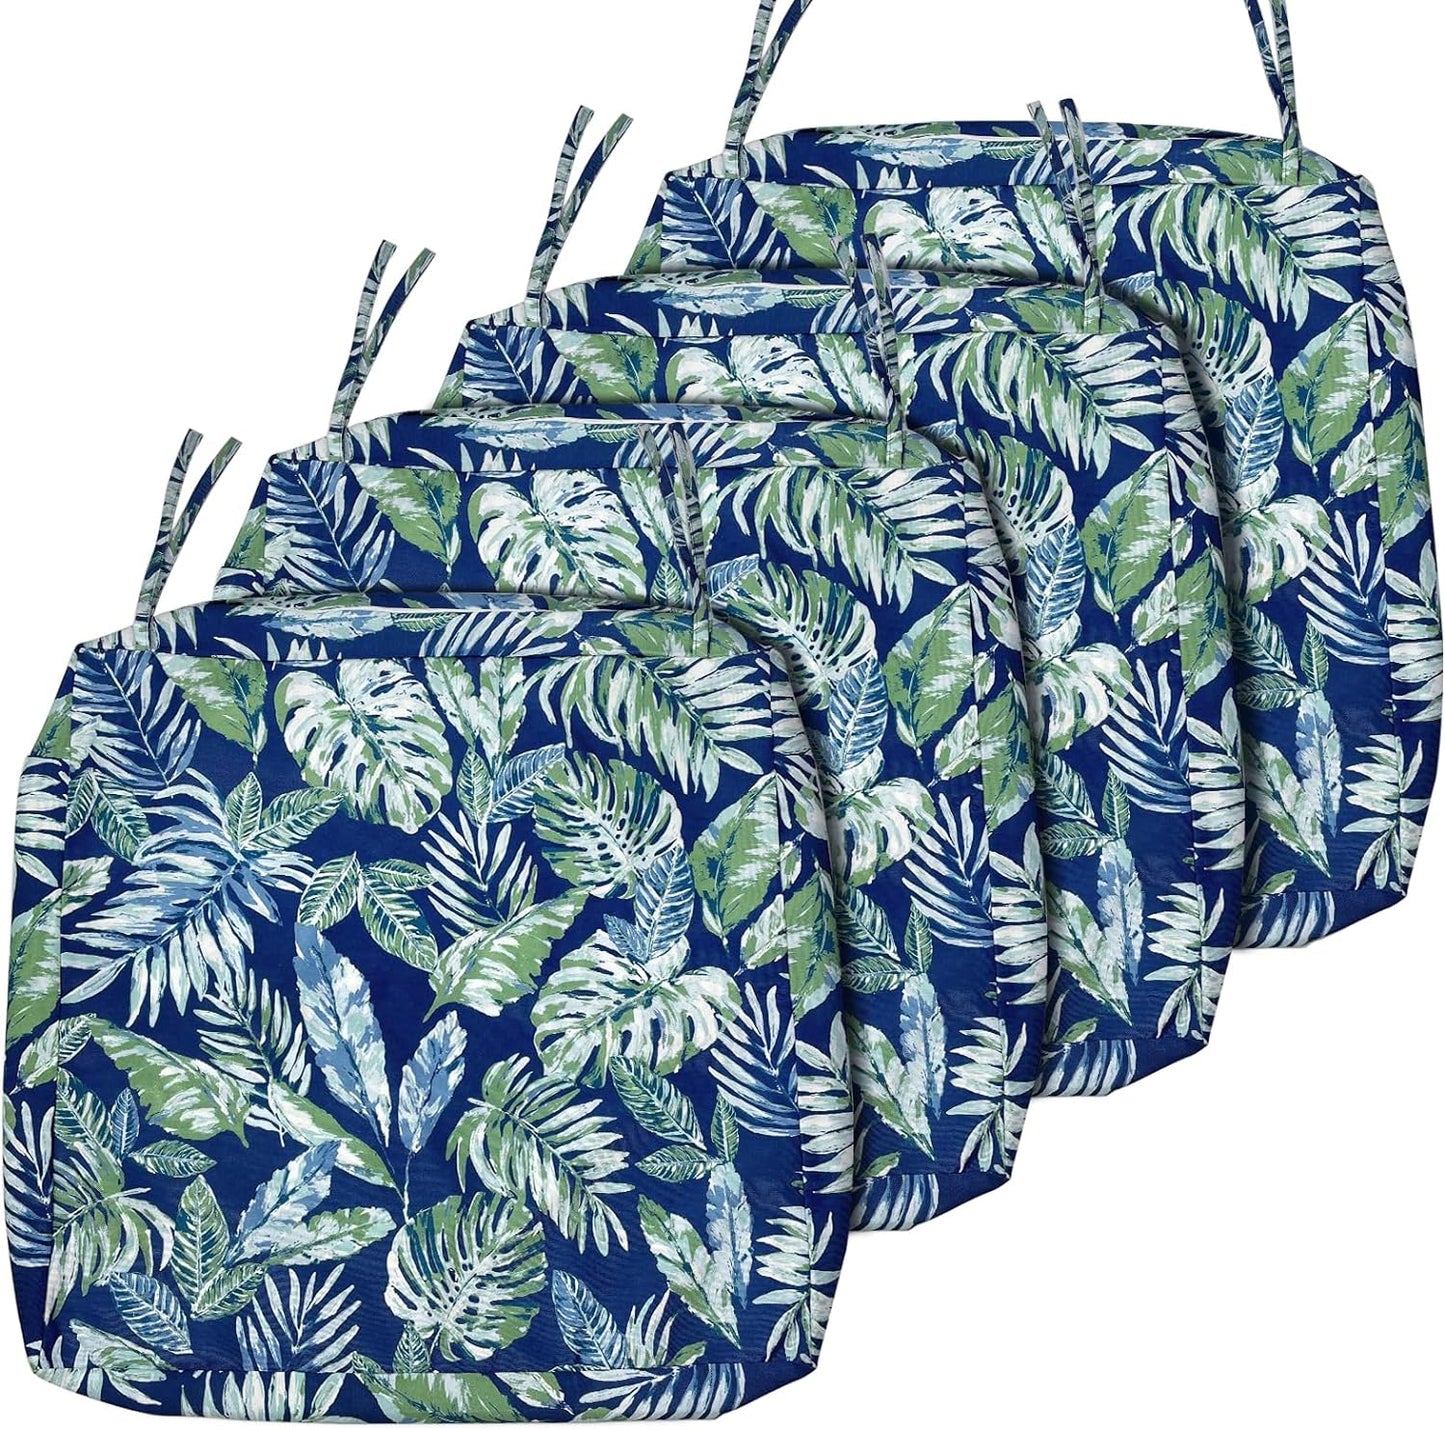 Sunlit Outdoor Cushion Covers 24" x 24" x 4", Replacement Cover Only, 4 Pack Water-Repellent Patio Chair Seat Slipcovers with Zipper and Tie, Tropical Leaf, Blue Green